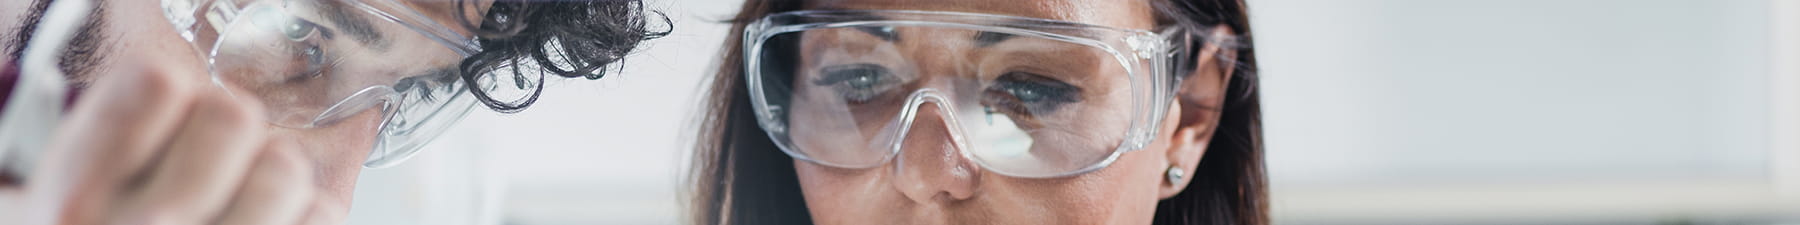 Scientists with protective glasses